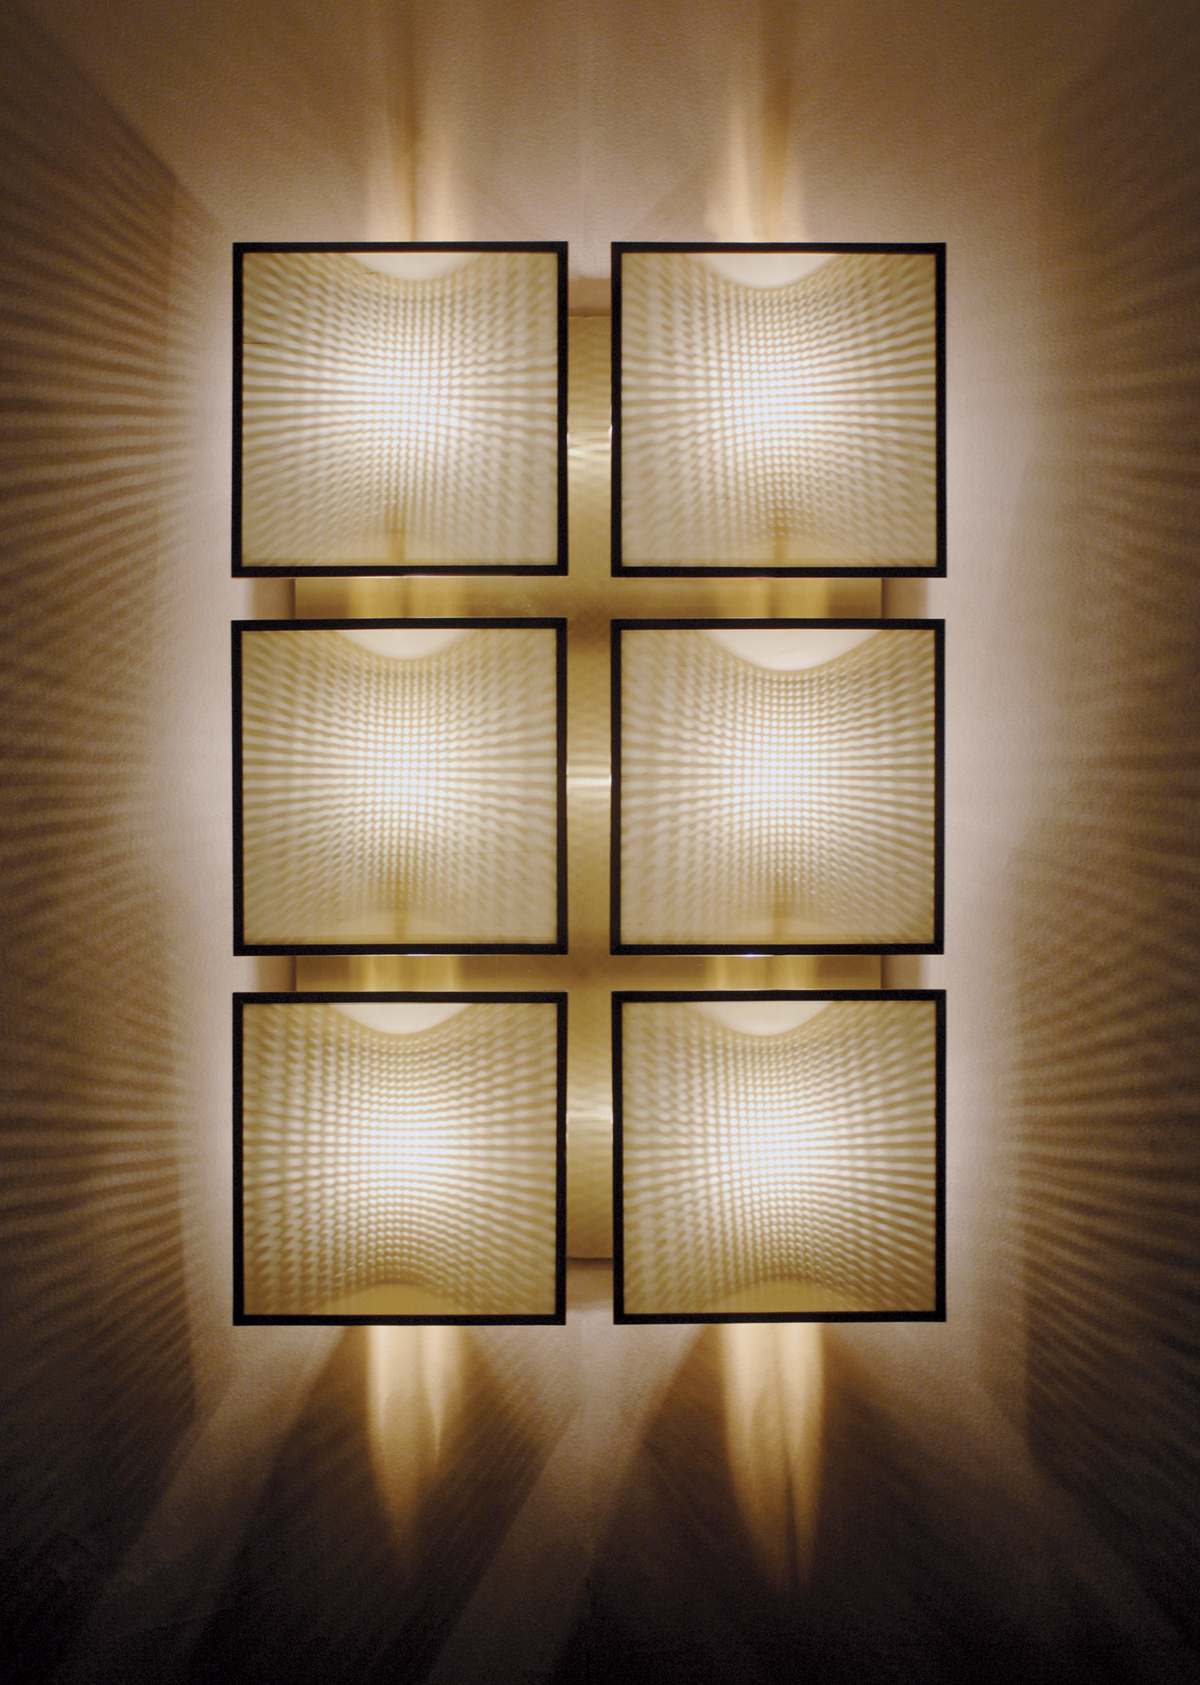 Teresa is a modular bronze wall lamp with a glass diffuser with linen, cotton or silk insert, from Promemoria's catalogue | Promemoria